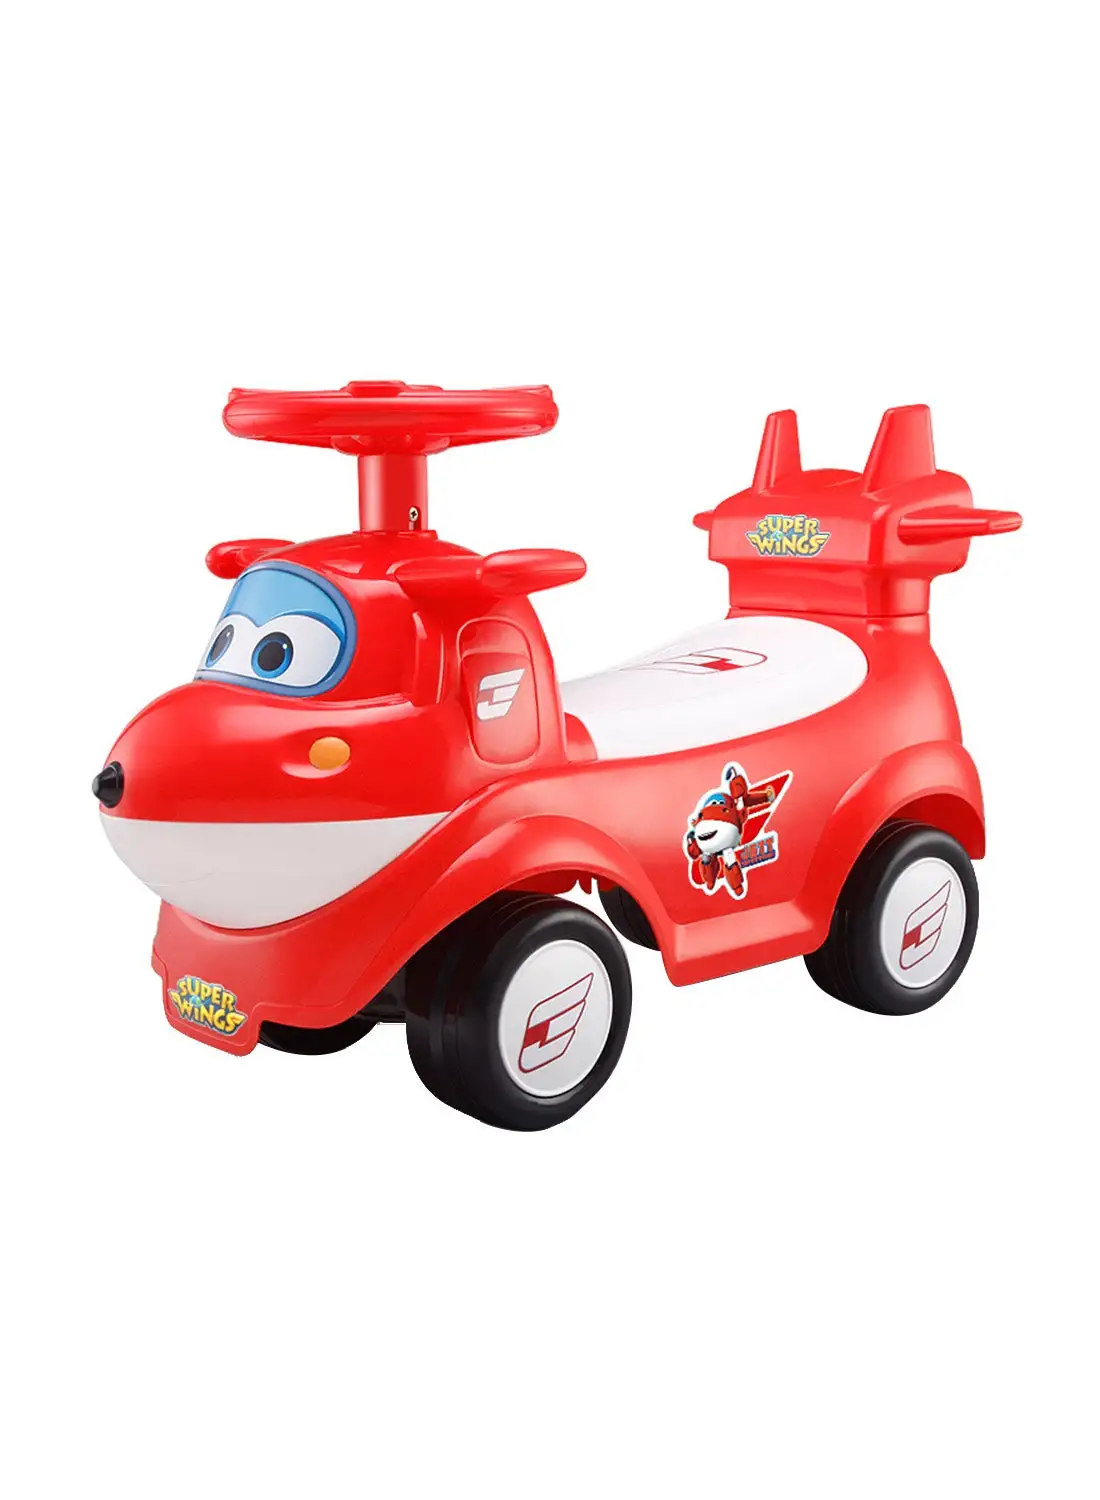 Fengda Super Wing Licenced Kids Ride On Toddler Toy With Music, Multicolour, Fd-6815